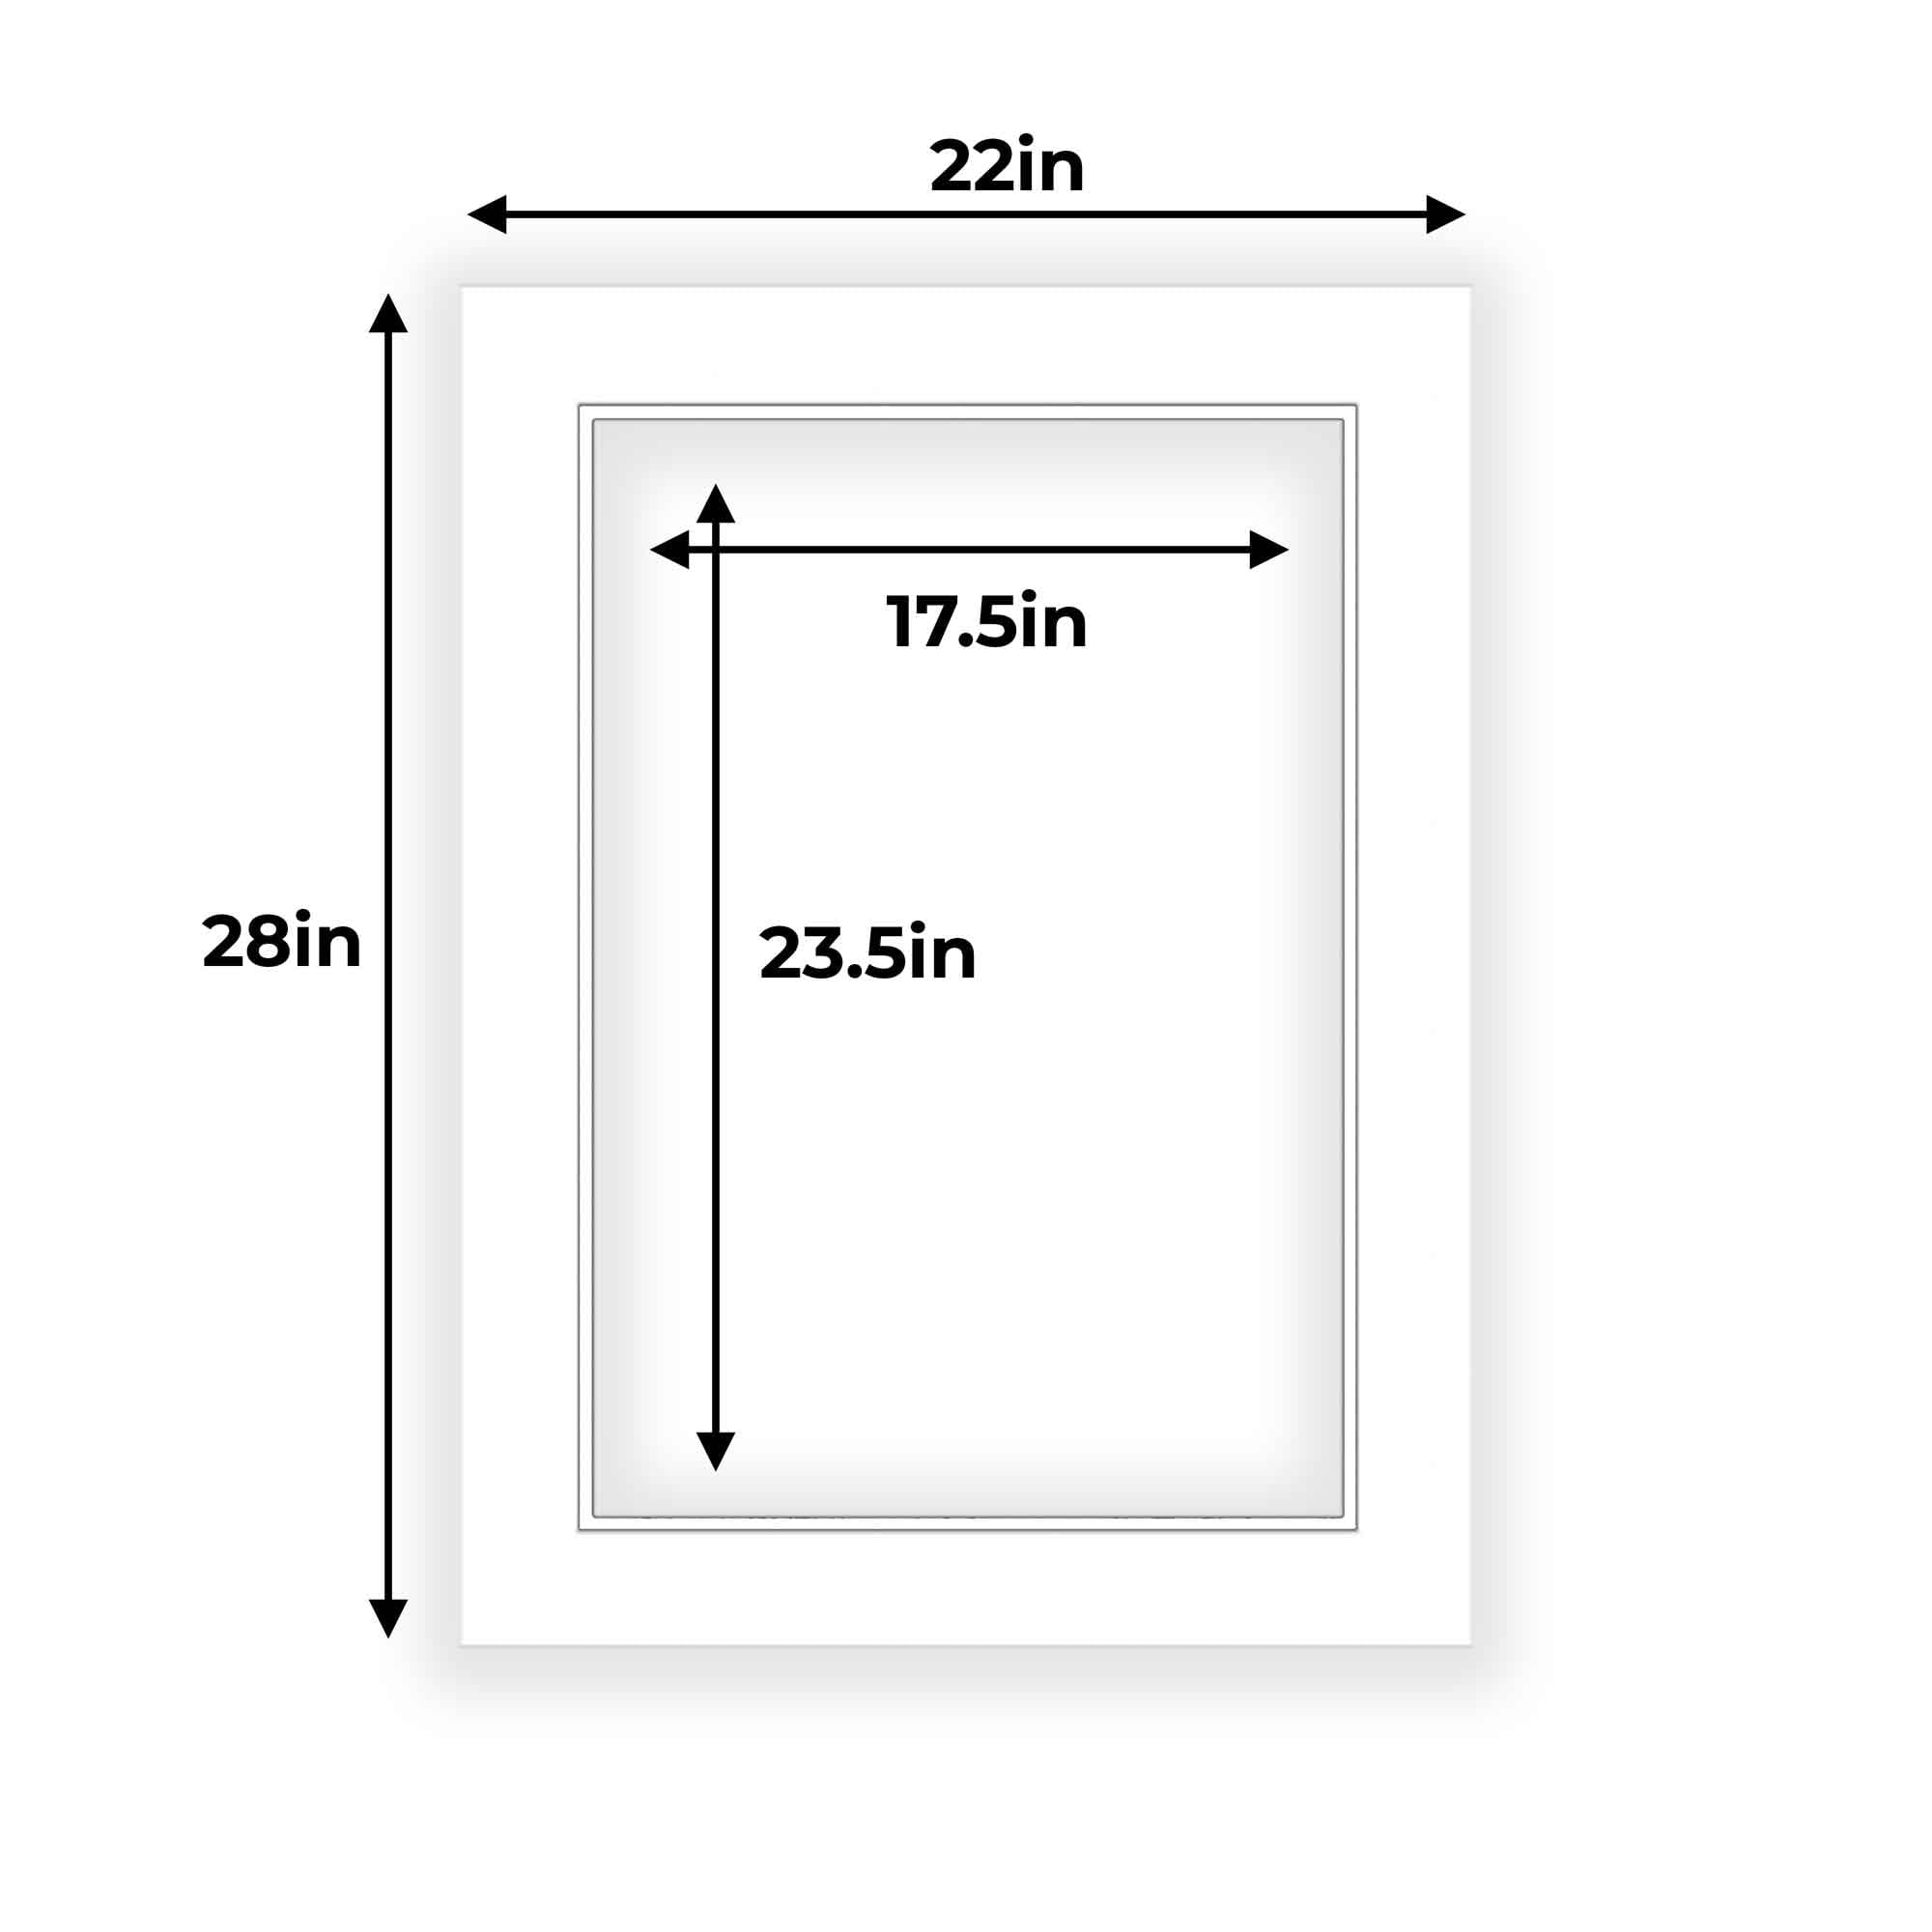 8x10 Mat for 6x8 Photo - White on Black Double Mat Matboard for Frames Measuring 8 x 10 in - to Display Art Measuring 6 x 8 in